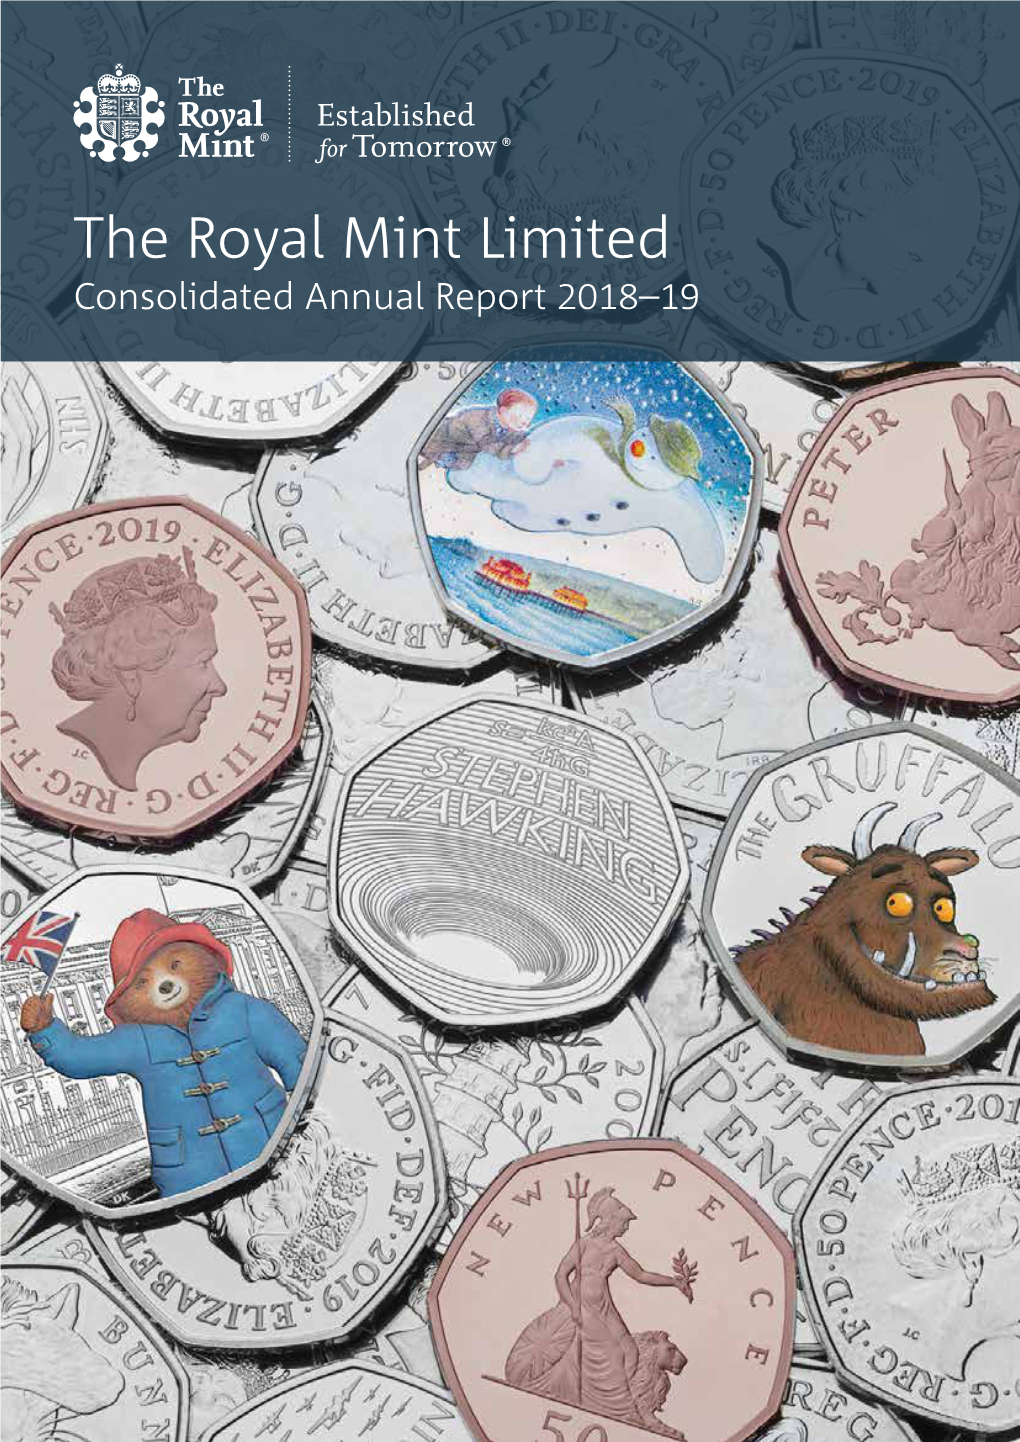 The Royal Mint Limited Consolidated Annual Report 2018–19 the Royal Mint Limited Consolidated Annual Report for the Year Ended 31 March 2019